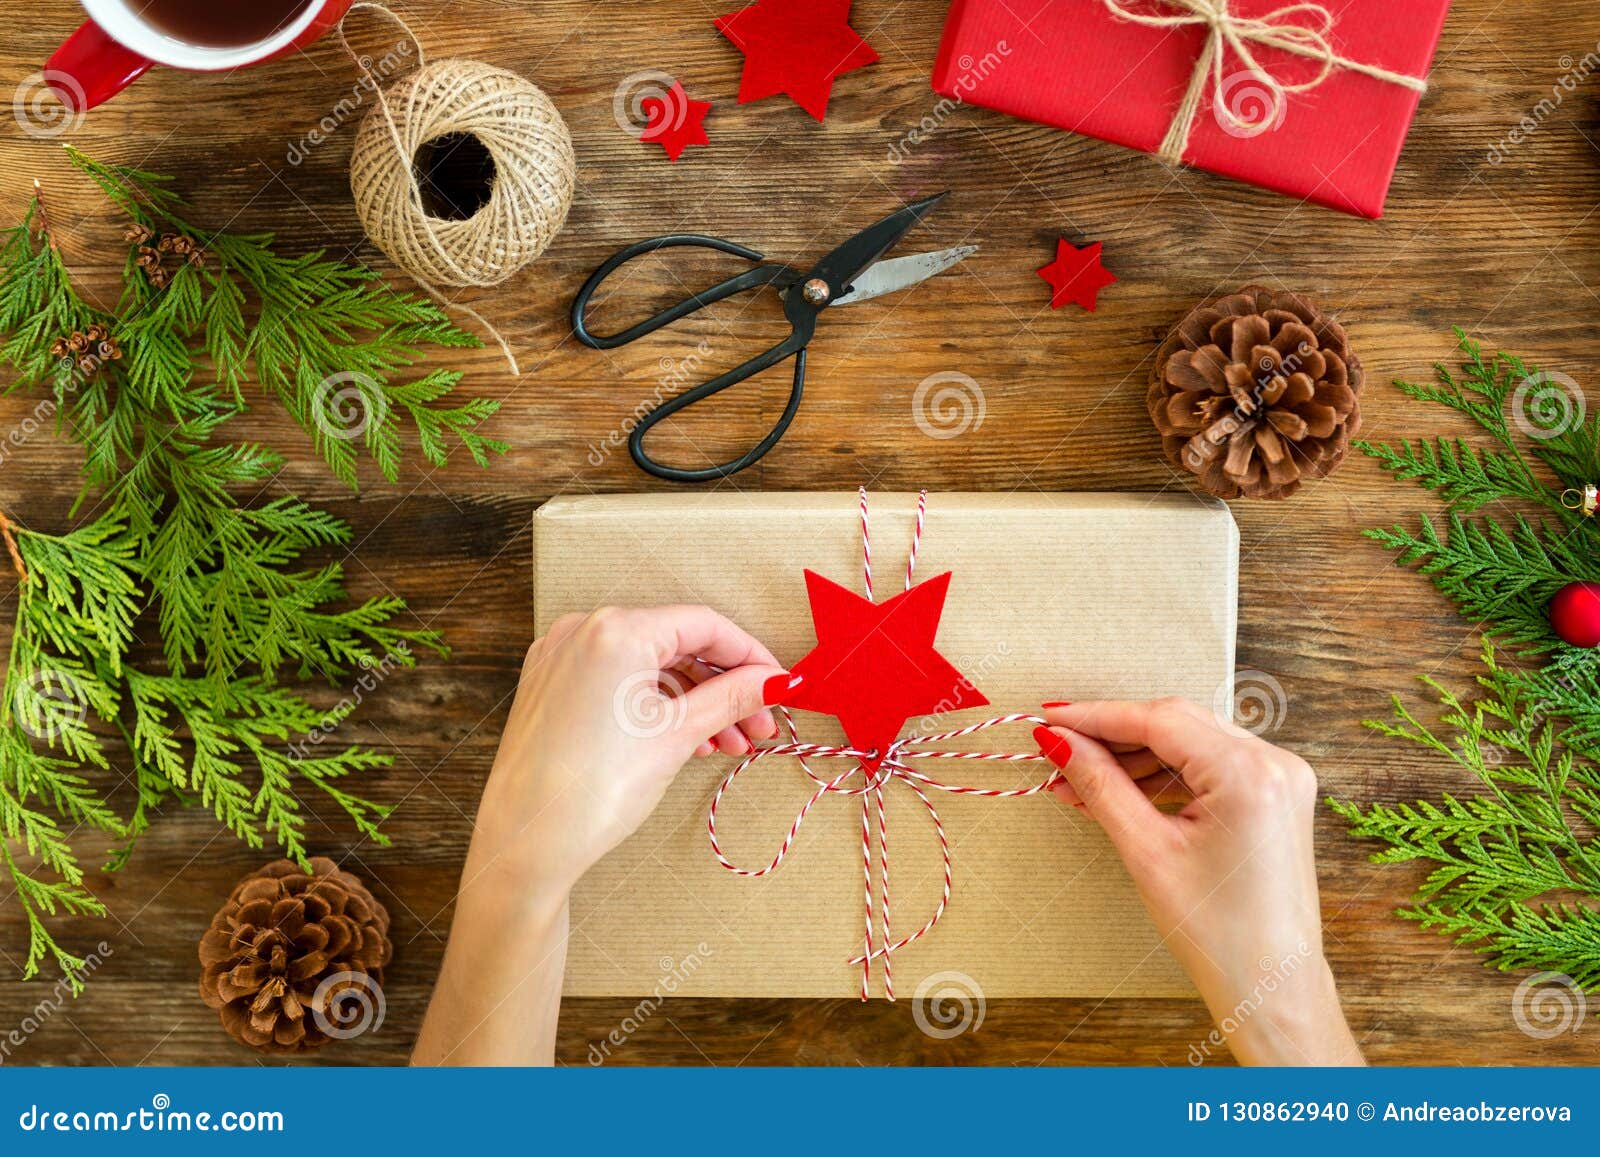 diy gift wrapping. woman wrapping beautiful red christmas gifts on rustic wooden table. overhead view christmas wrapping.